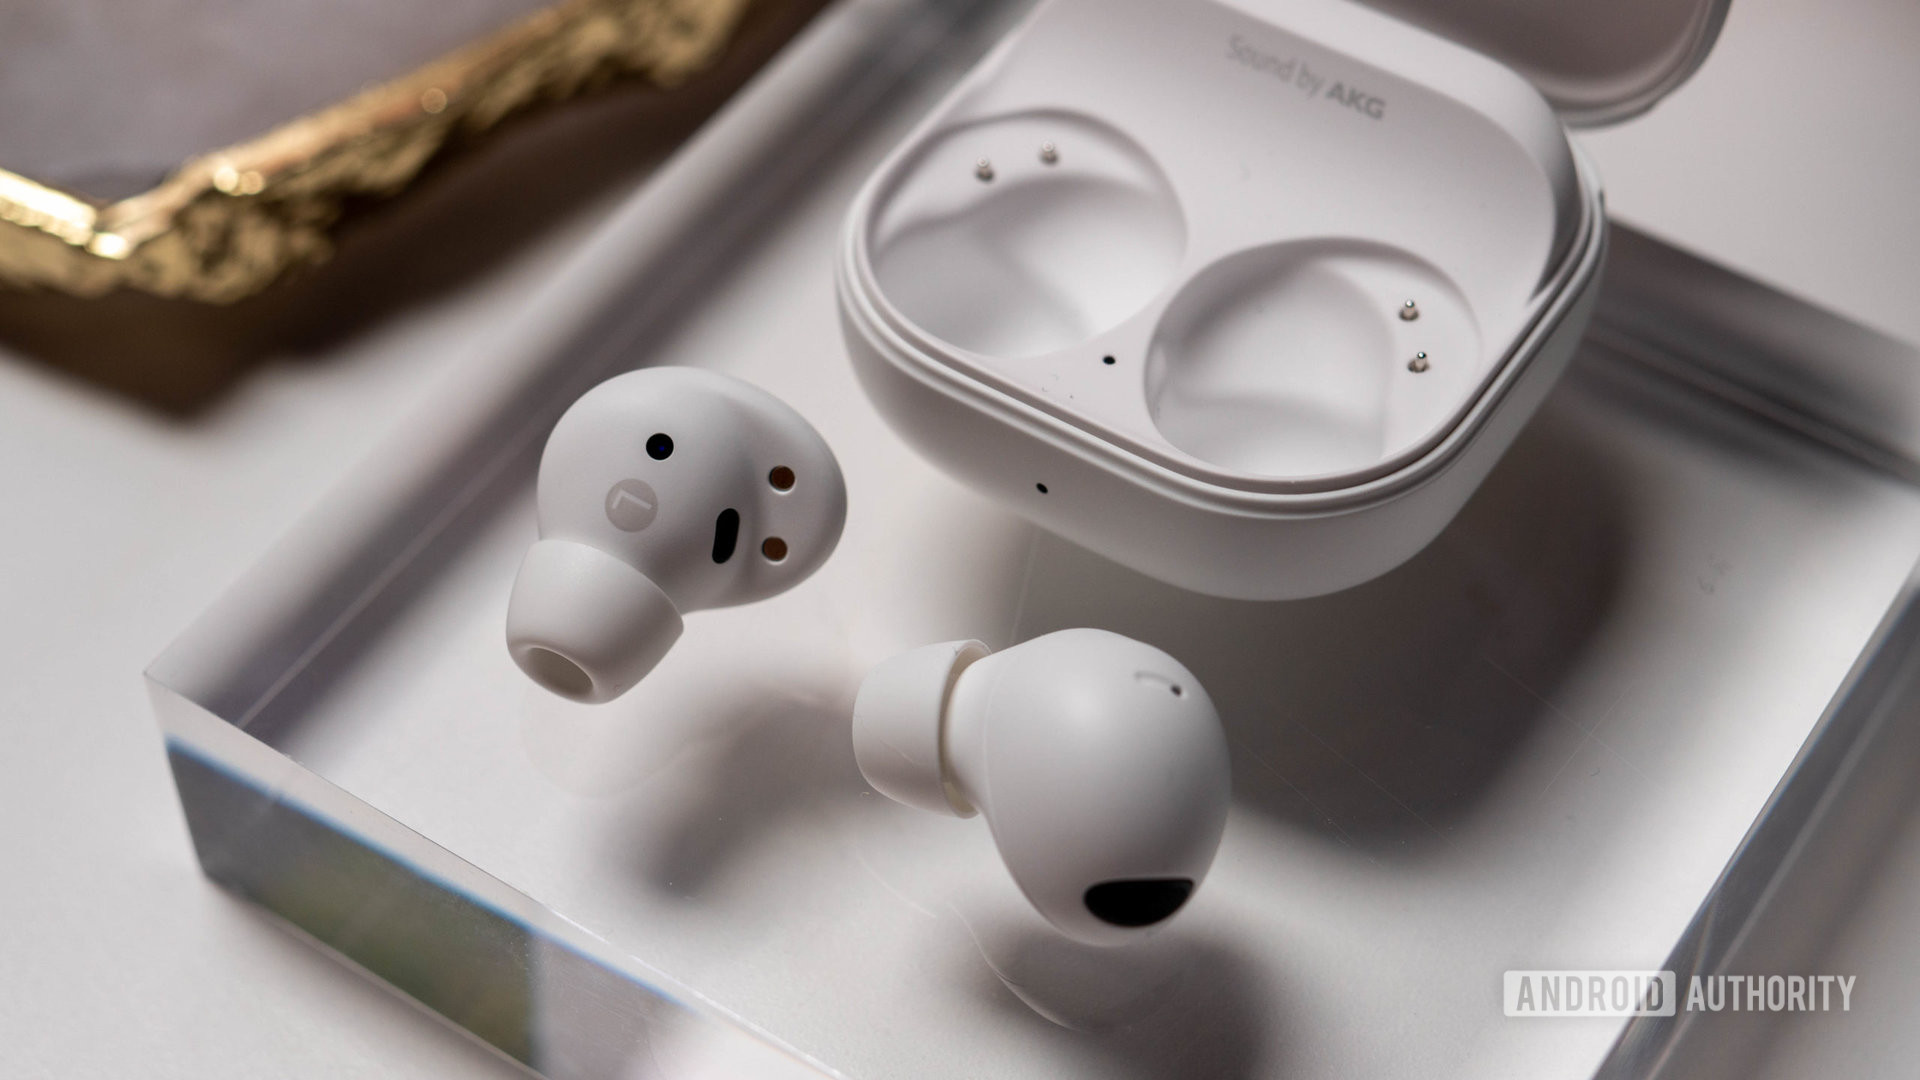 Samsung Galaxy Buds 2 Pro in white next to the charging case